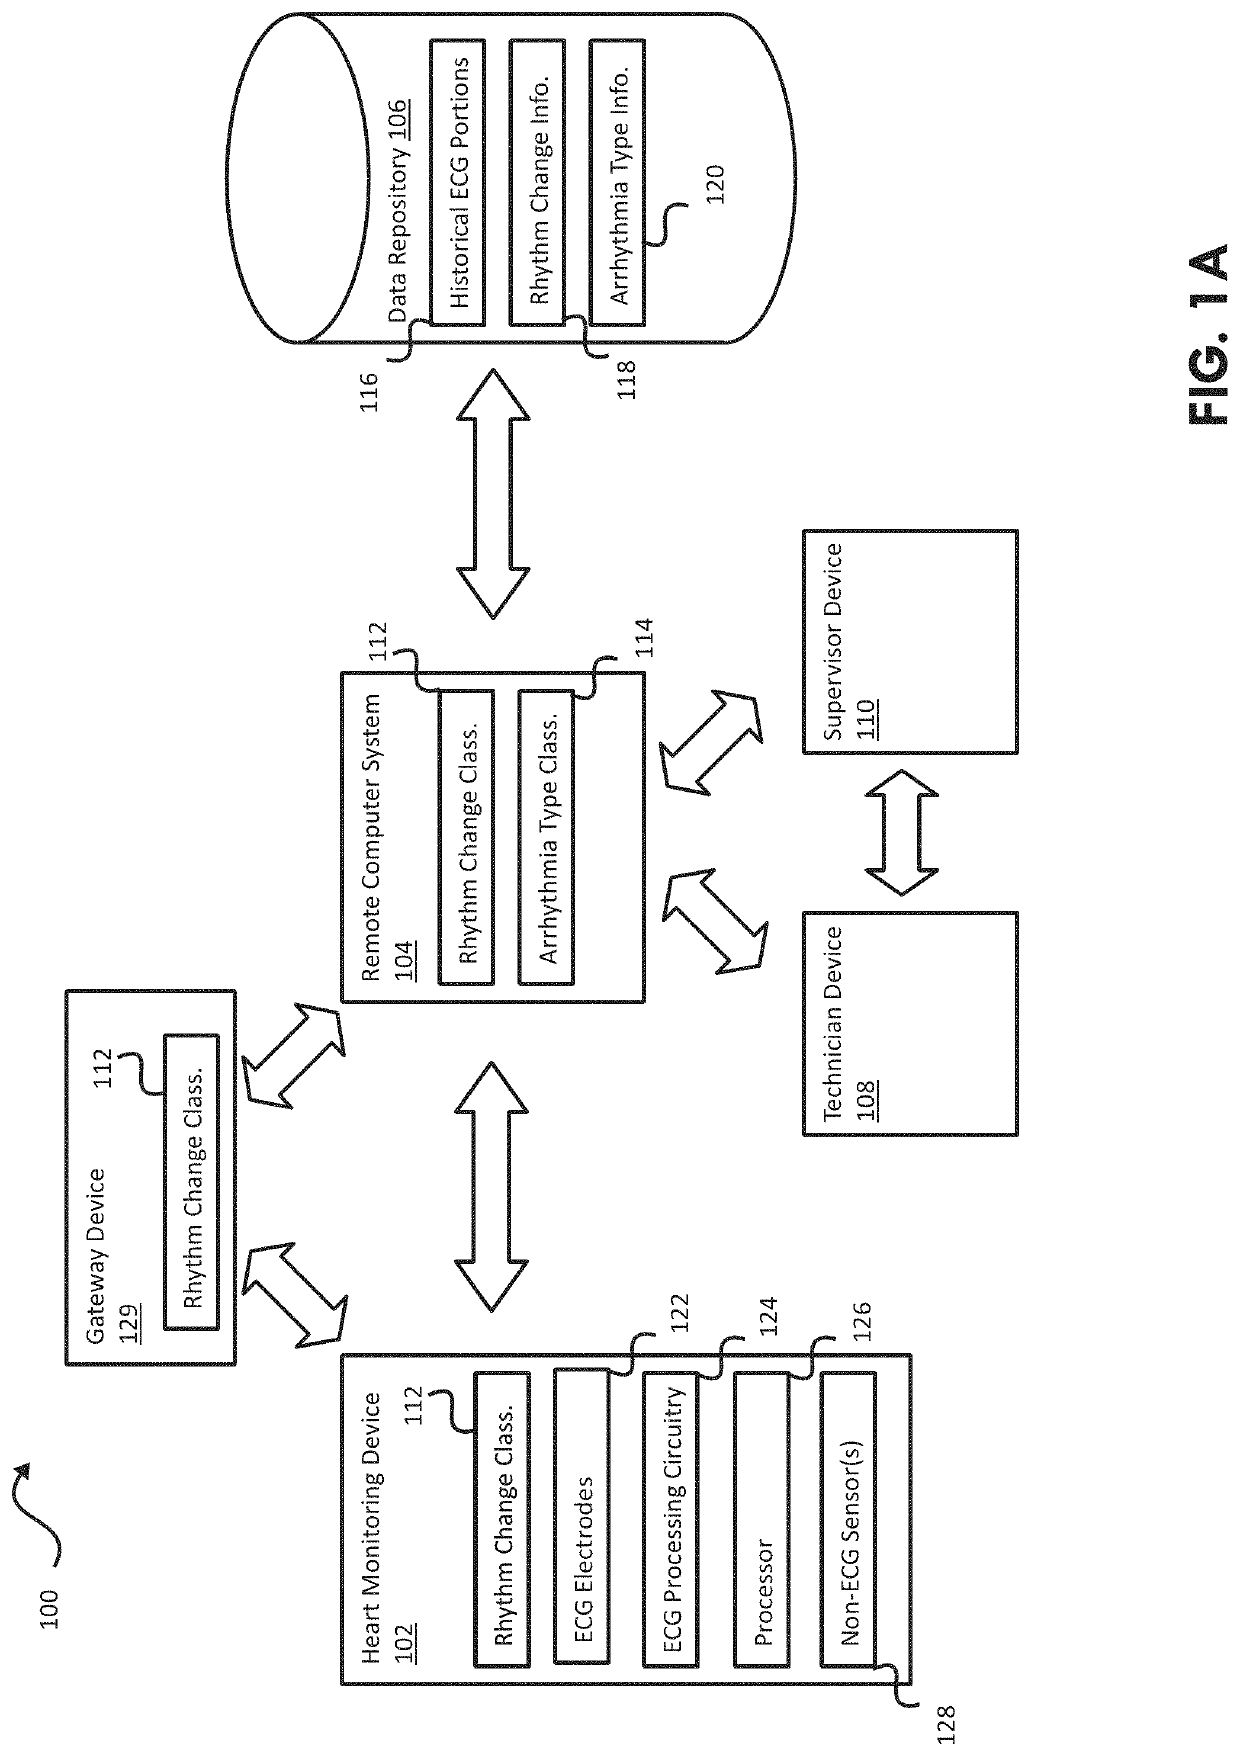 Systems, Devices, and Methods for Cardiac Diagnosis and/or Monitoring